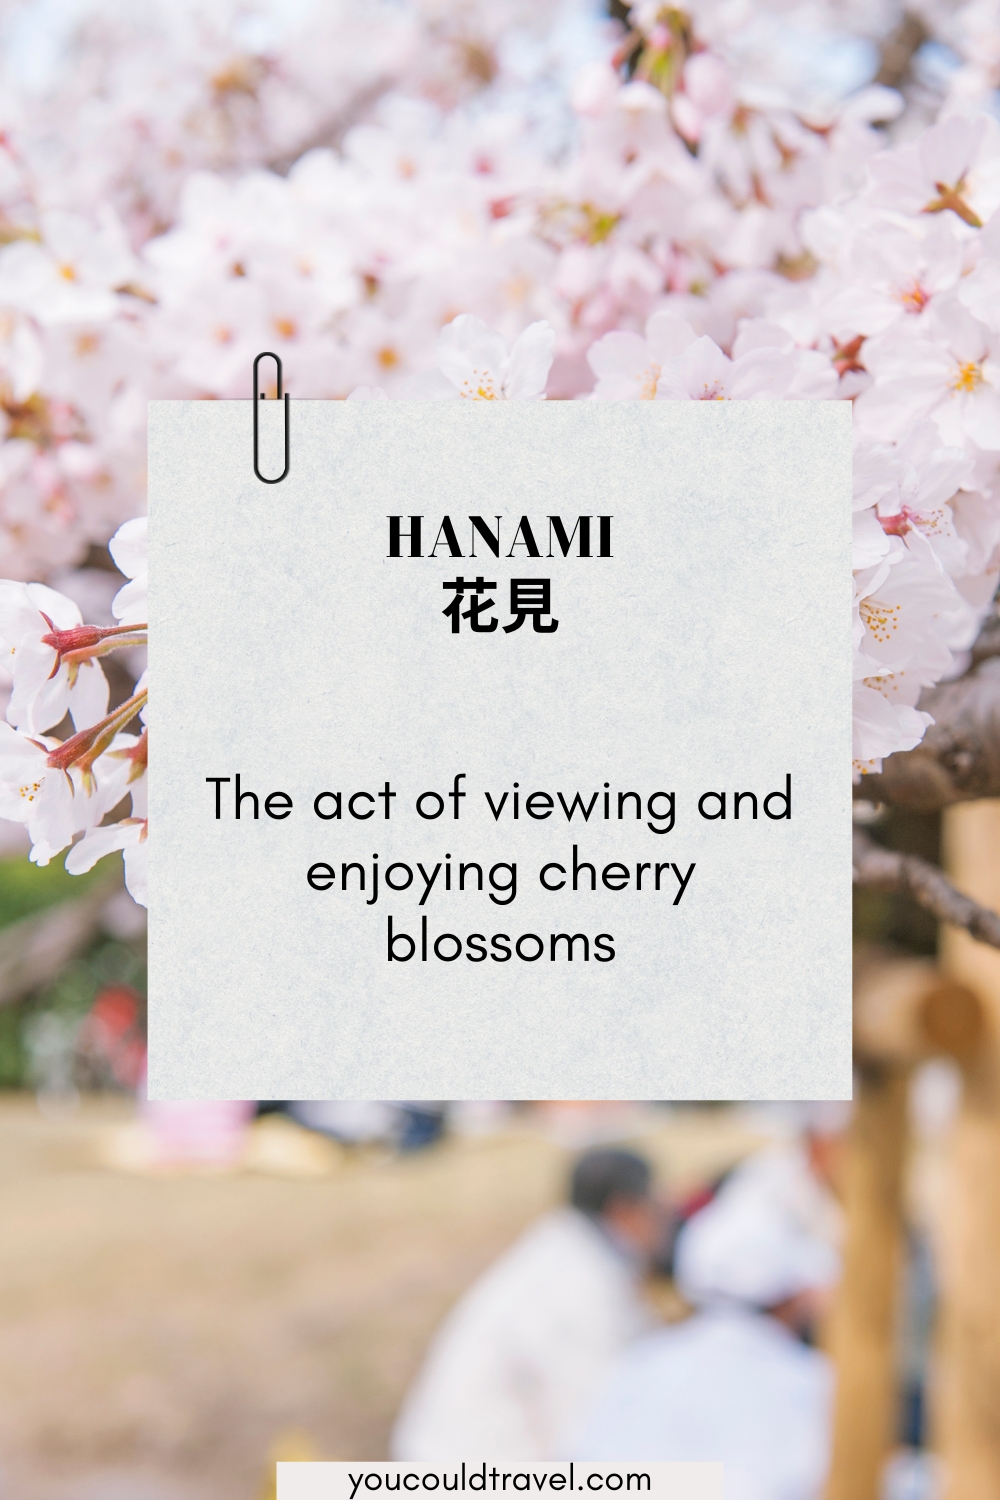 Hanami - the act of viewing and enjoying cherry blossoms